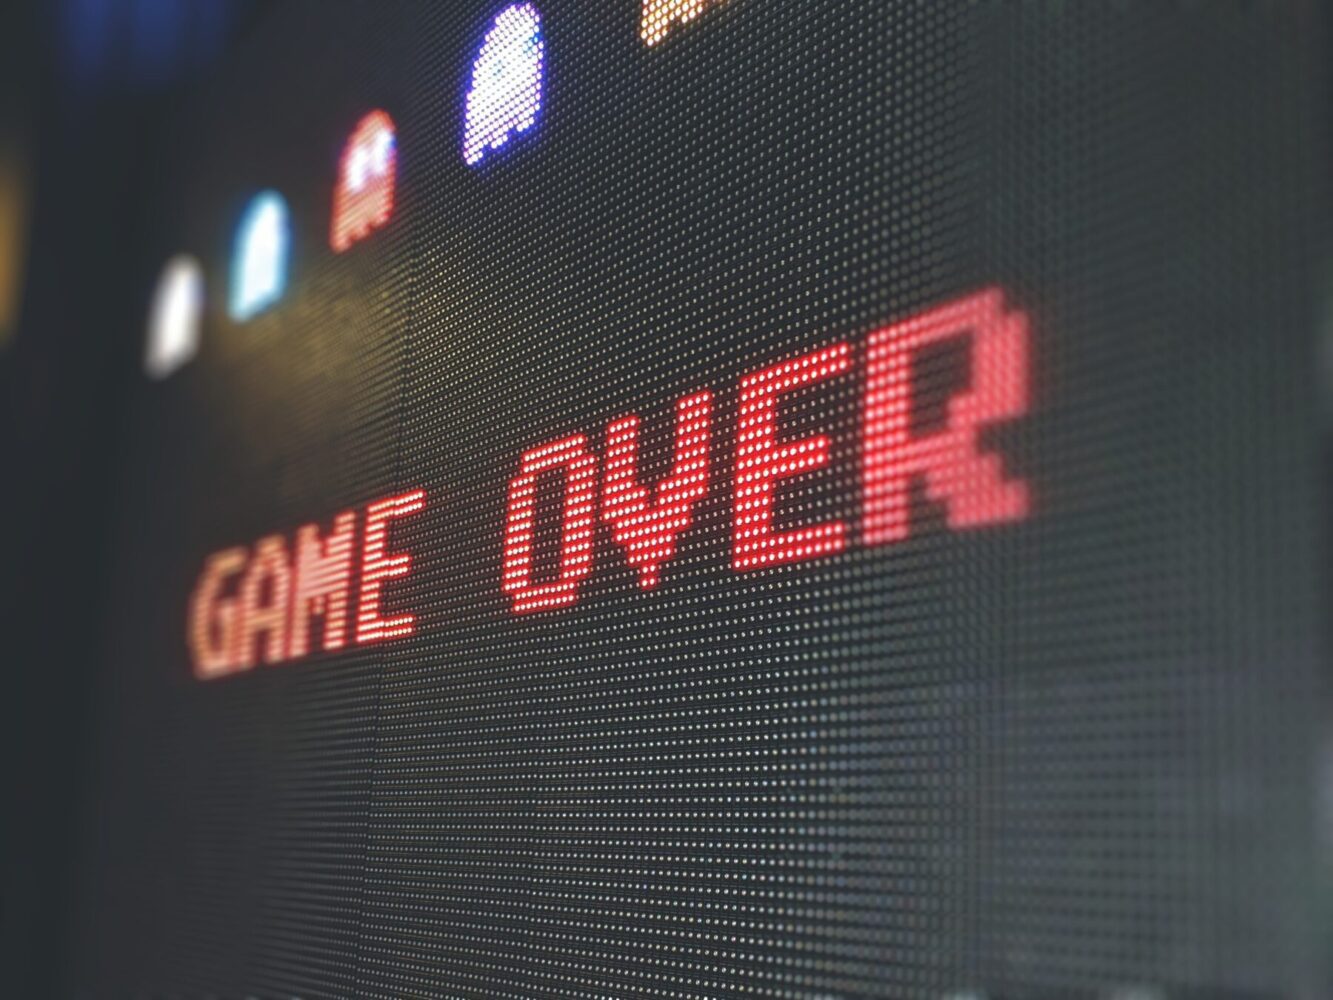 A screen showing the words "Game over"